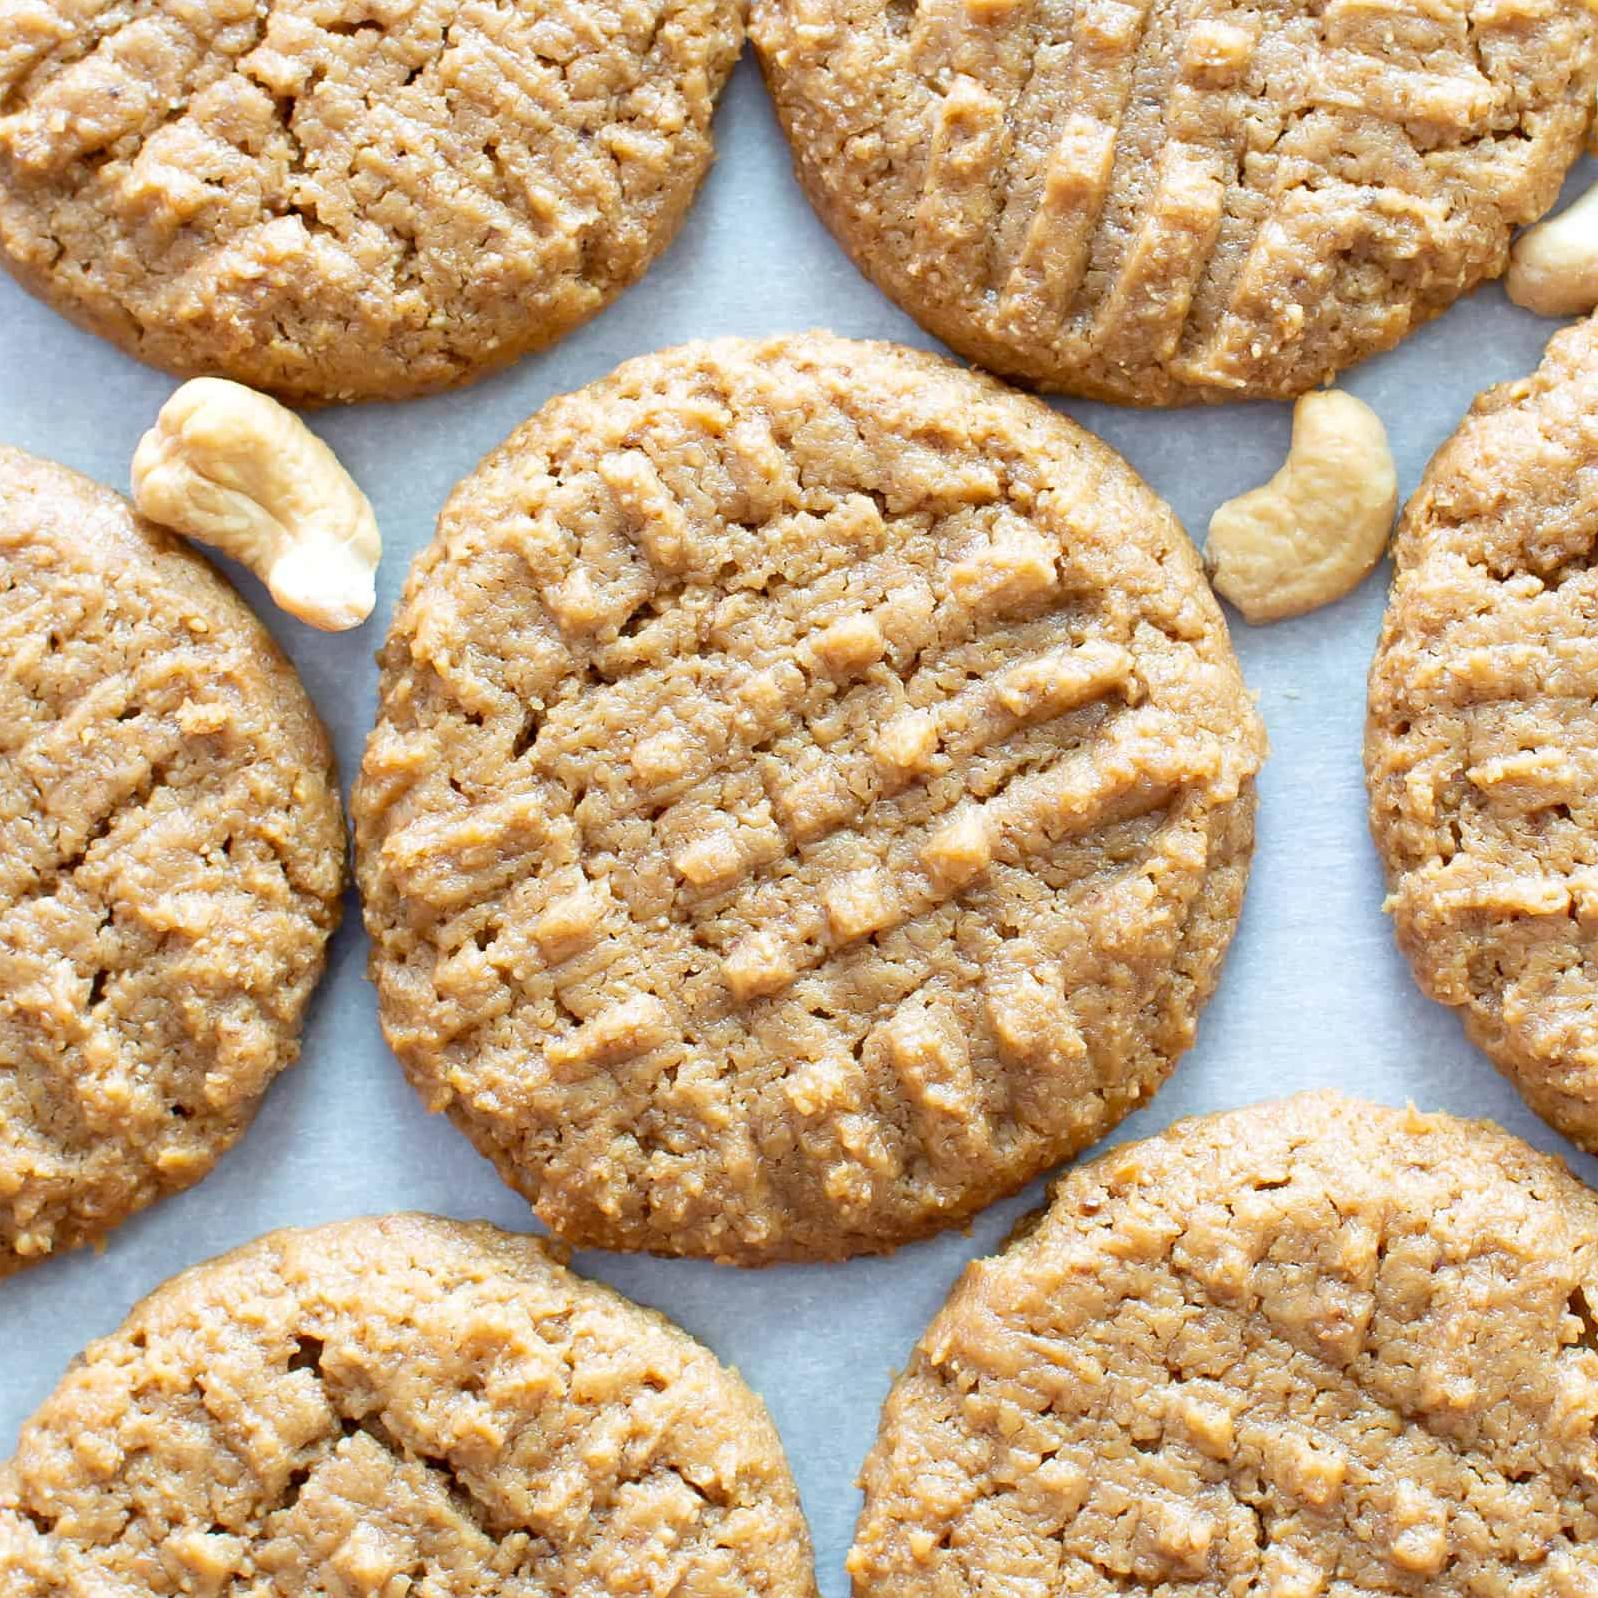  Get ready to enjoy some mouth-watering and healthy gluten free cashew butter cookies!